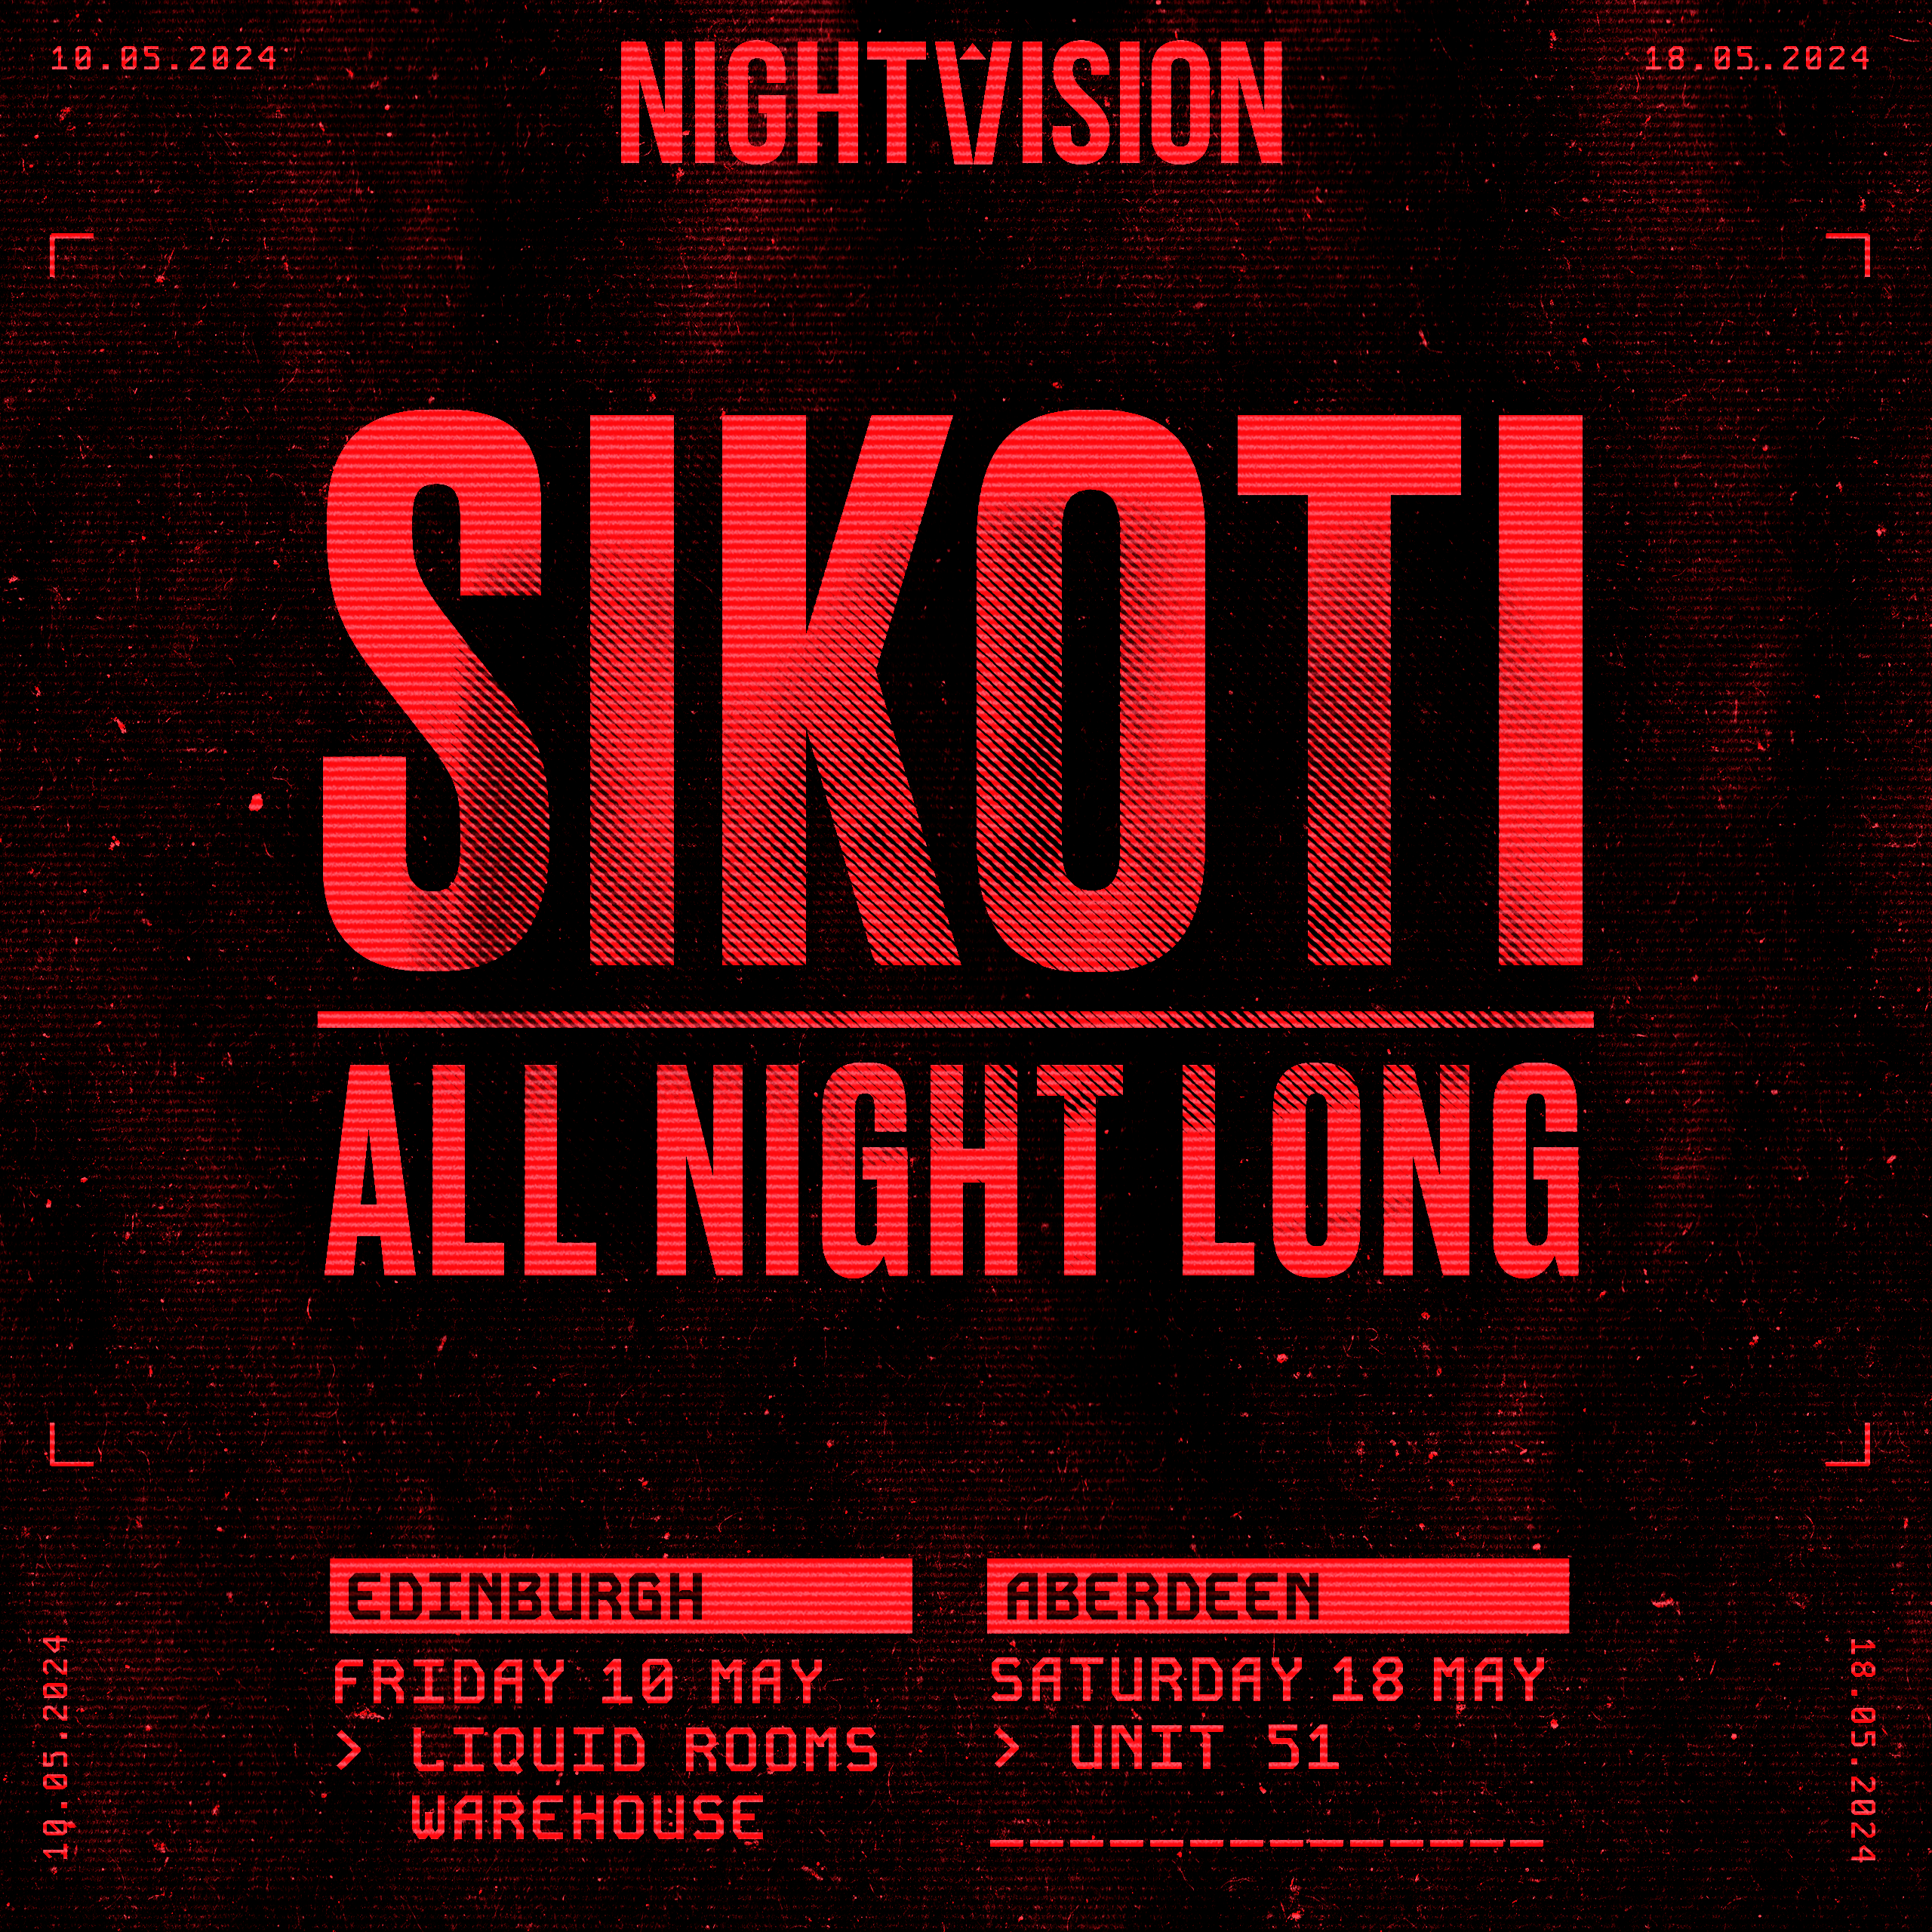 Nightvision presents: SIKOTI All Night Long - Aberdeen - フライヤー表